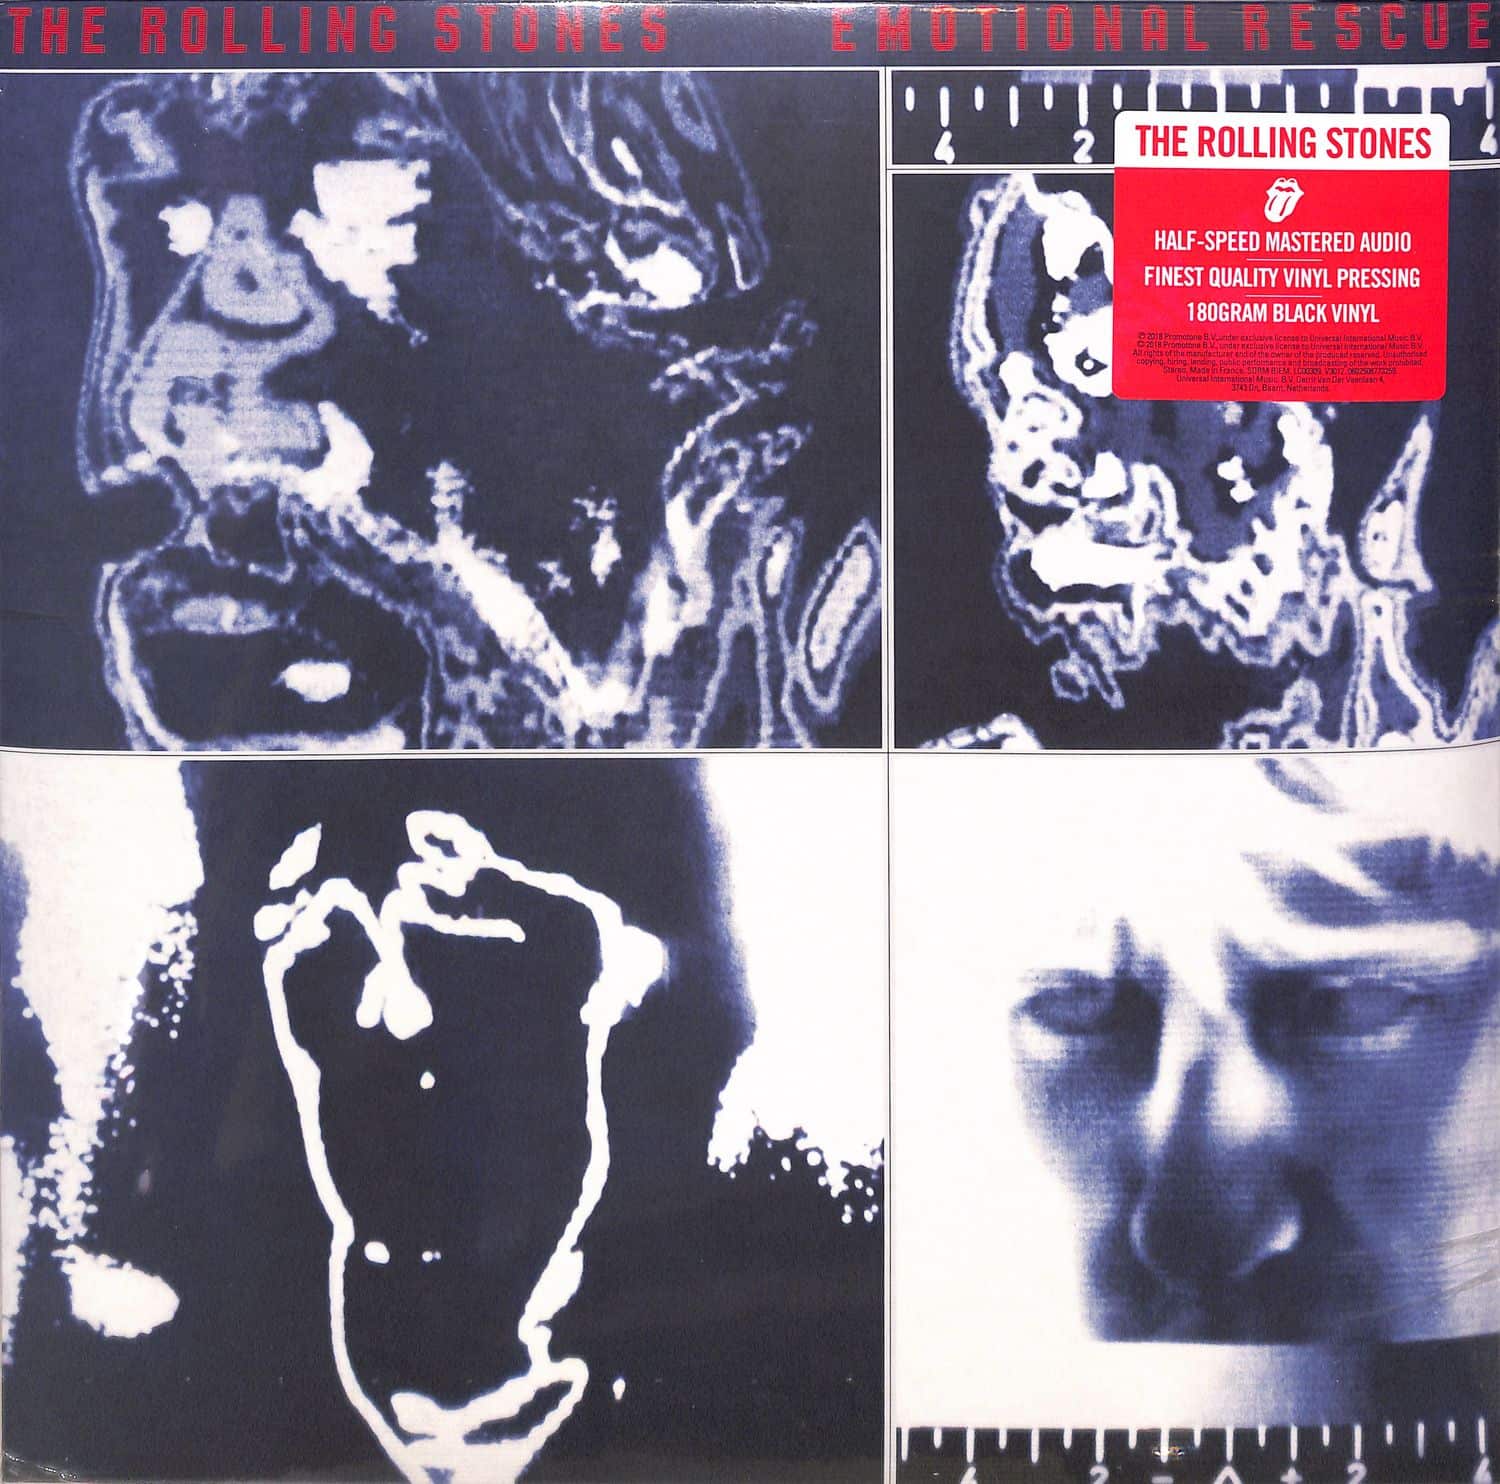 The Rolling Stones - EMOTIONAL RESCUE 